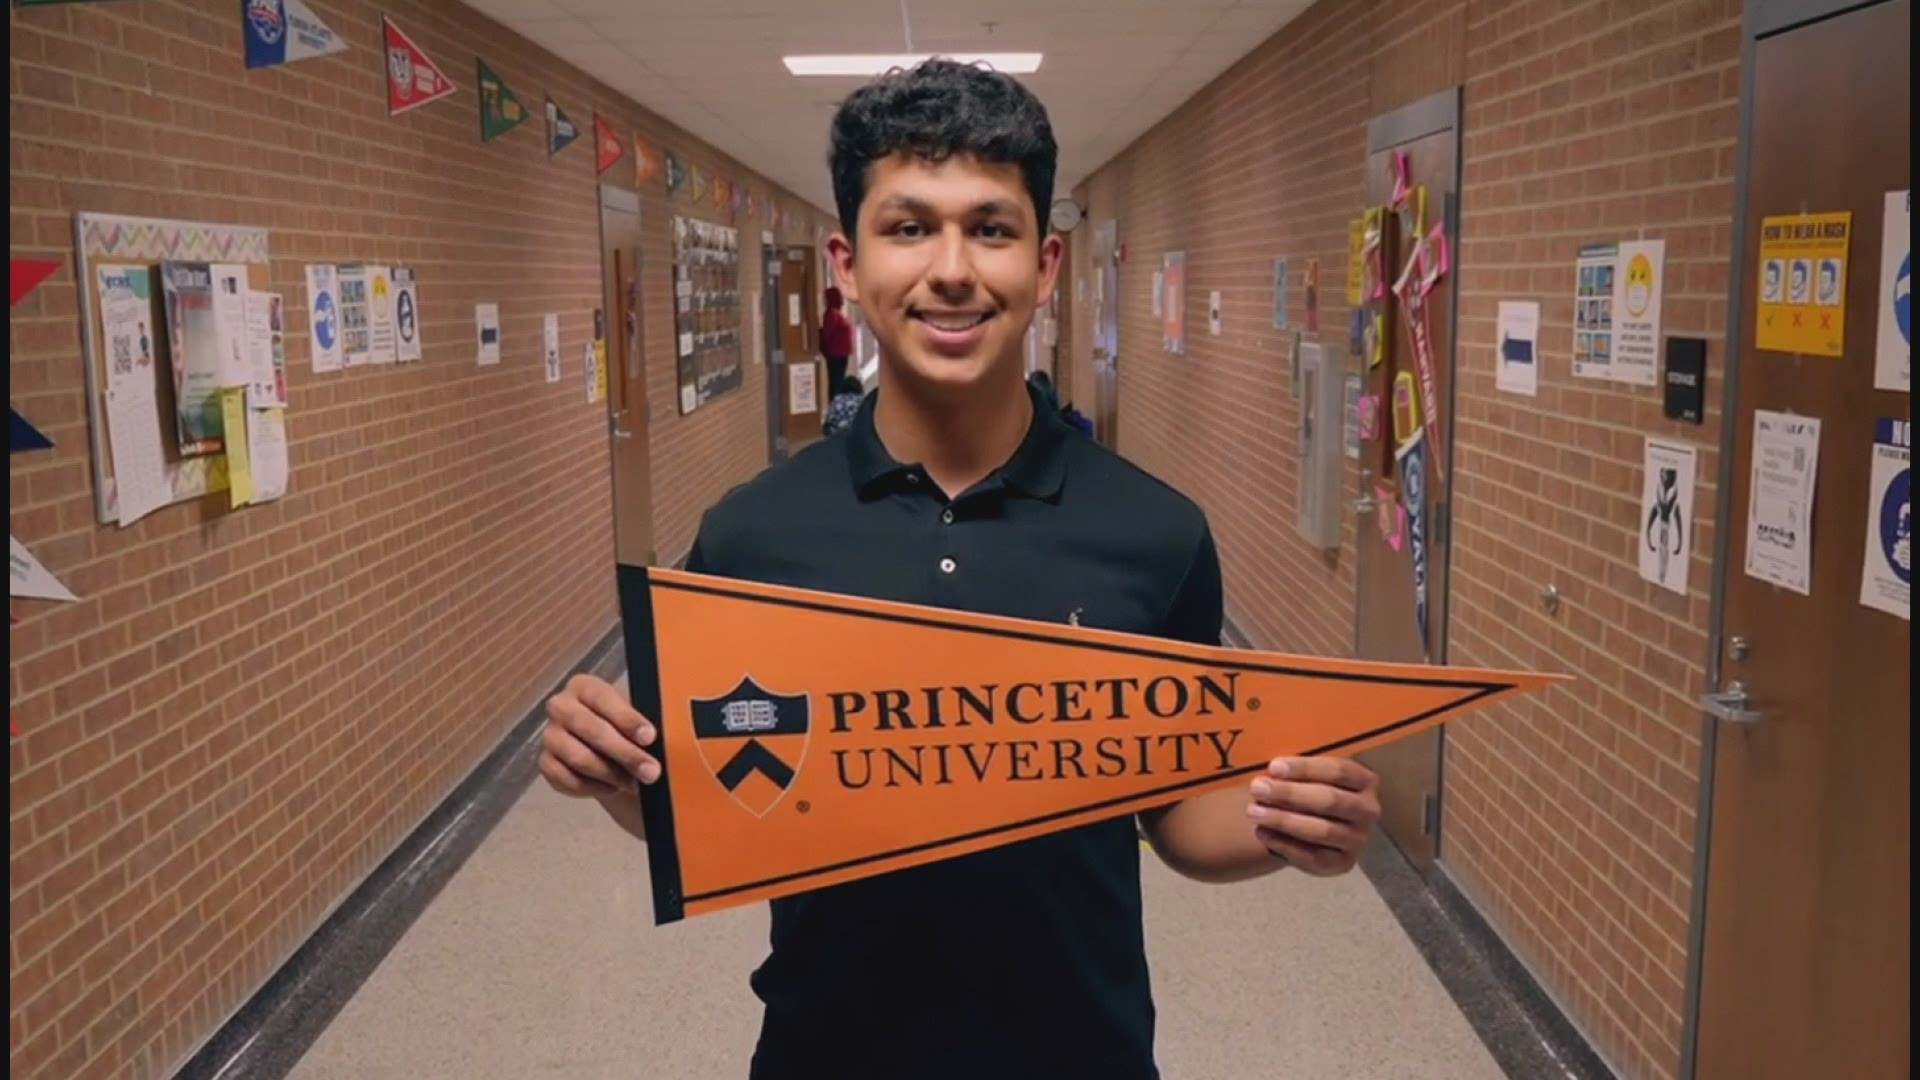 Jesus Herrera is headed to the Ivy League this fall to attend Princeton University!